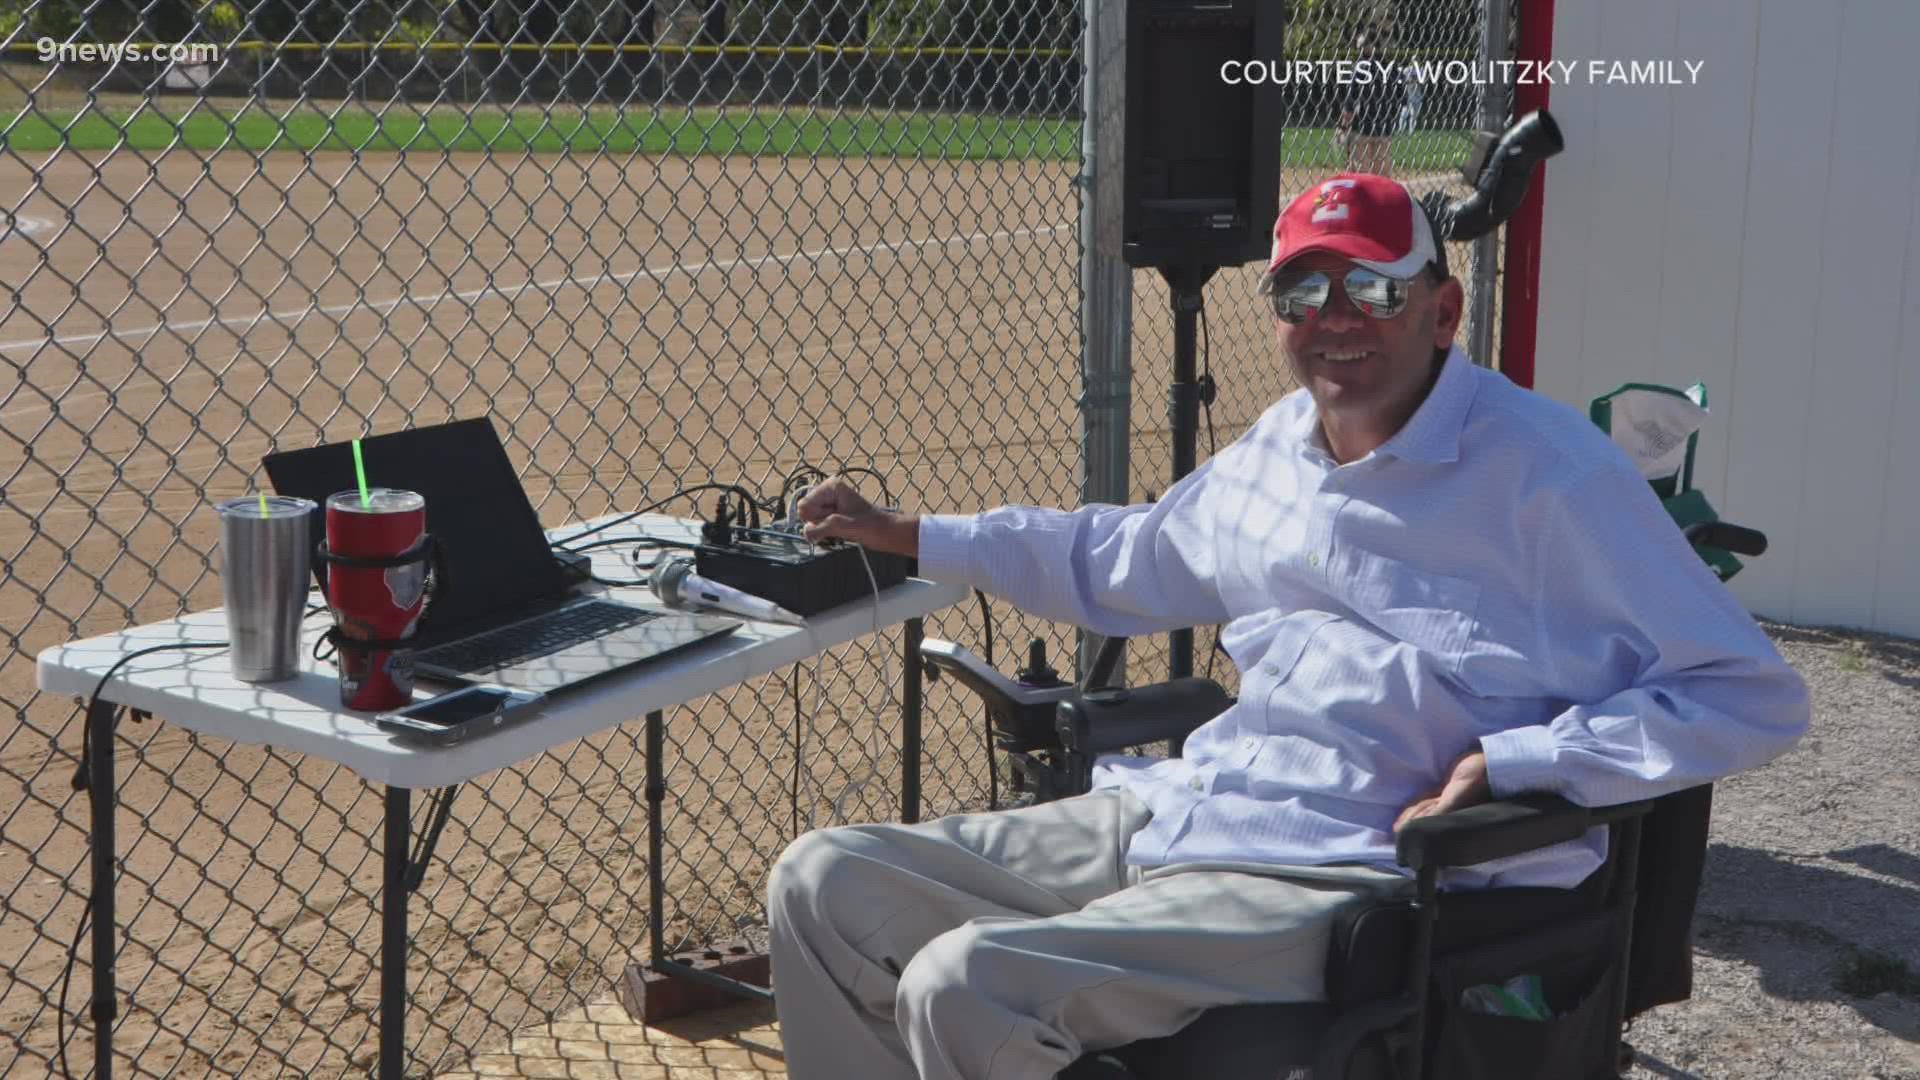 Kevin Wolitzky faced curveballs at Smoky Hill High in Aurora and in adulthood. He was paralyzed after years of baseball. Friends say it never changed who he was.